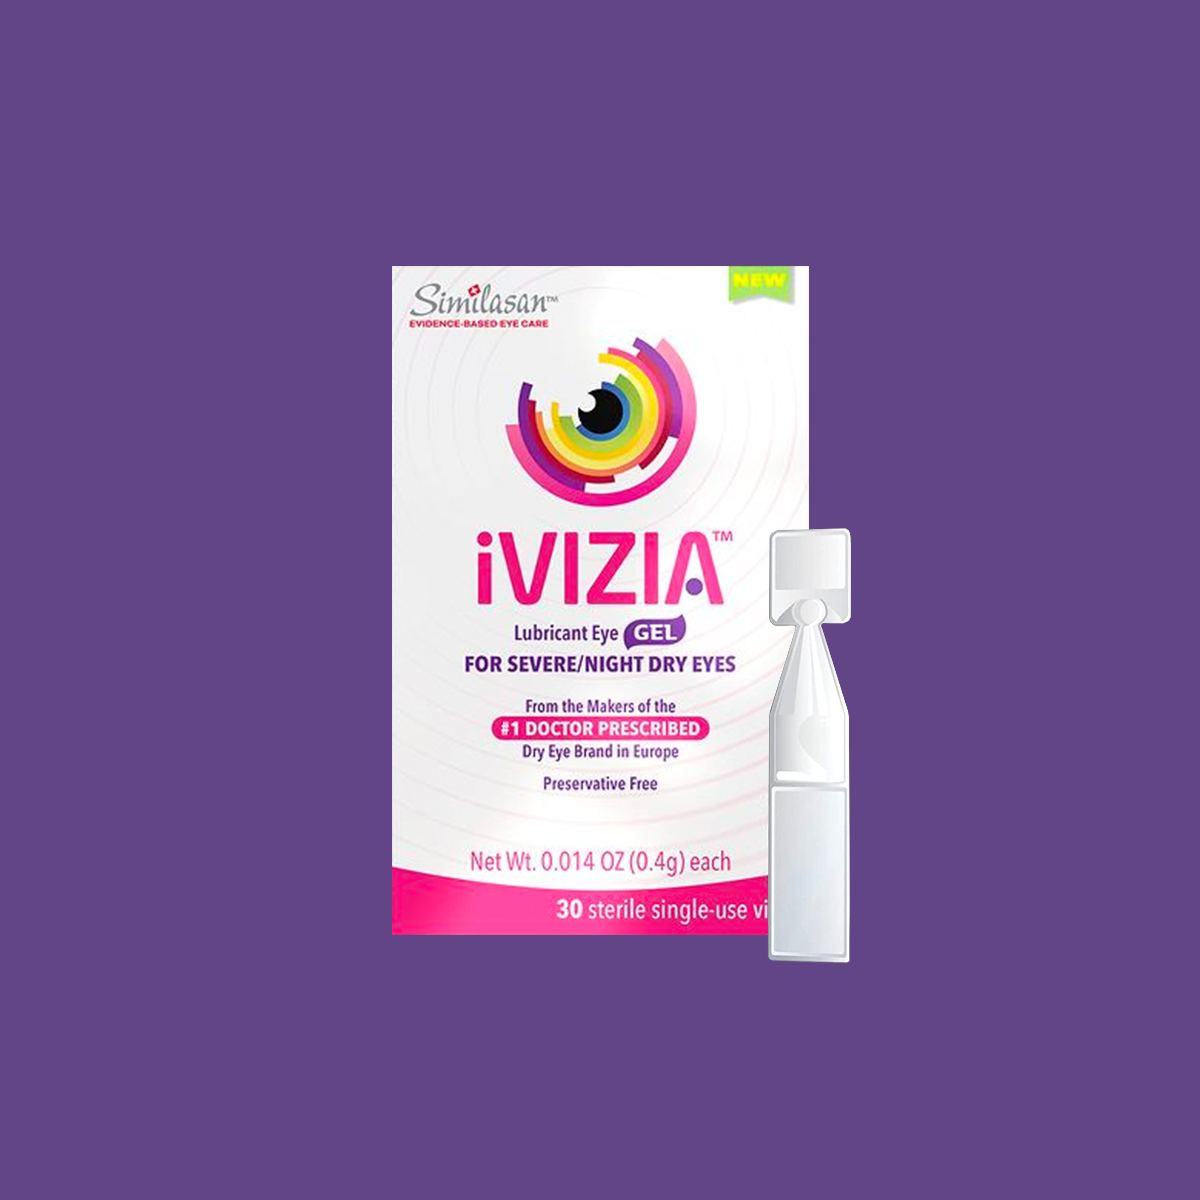 iVIZIA Lubricant Eye Gel for Severe and Nighttime Dry Eye Relief, Preservative-Free, 30 Sterile Single-Use Vials